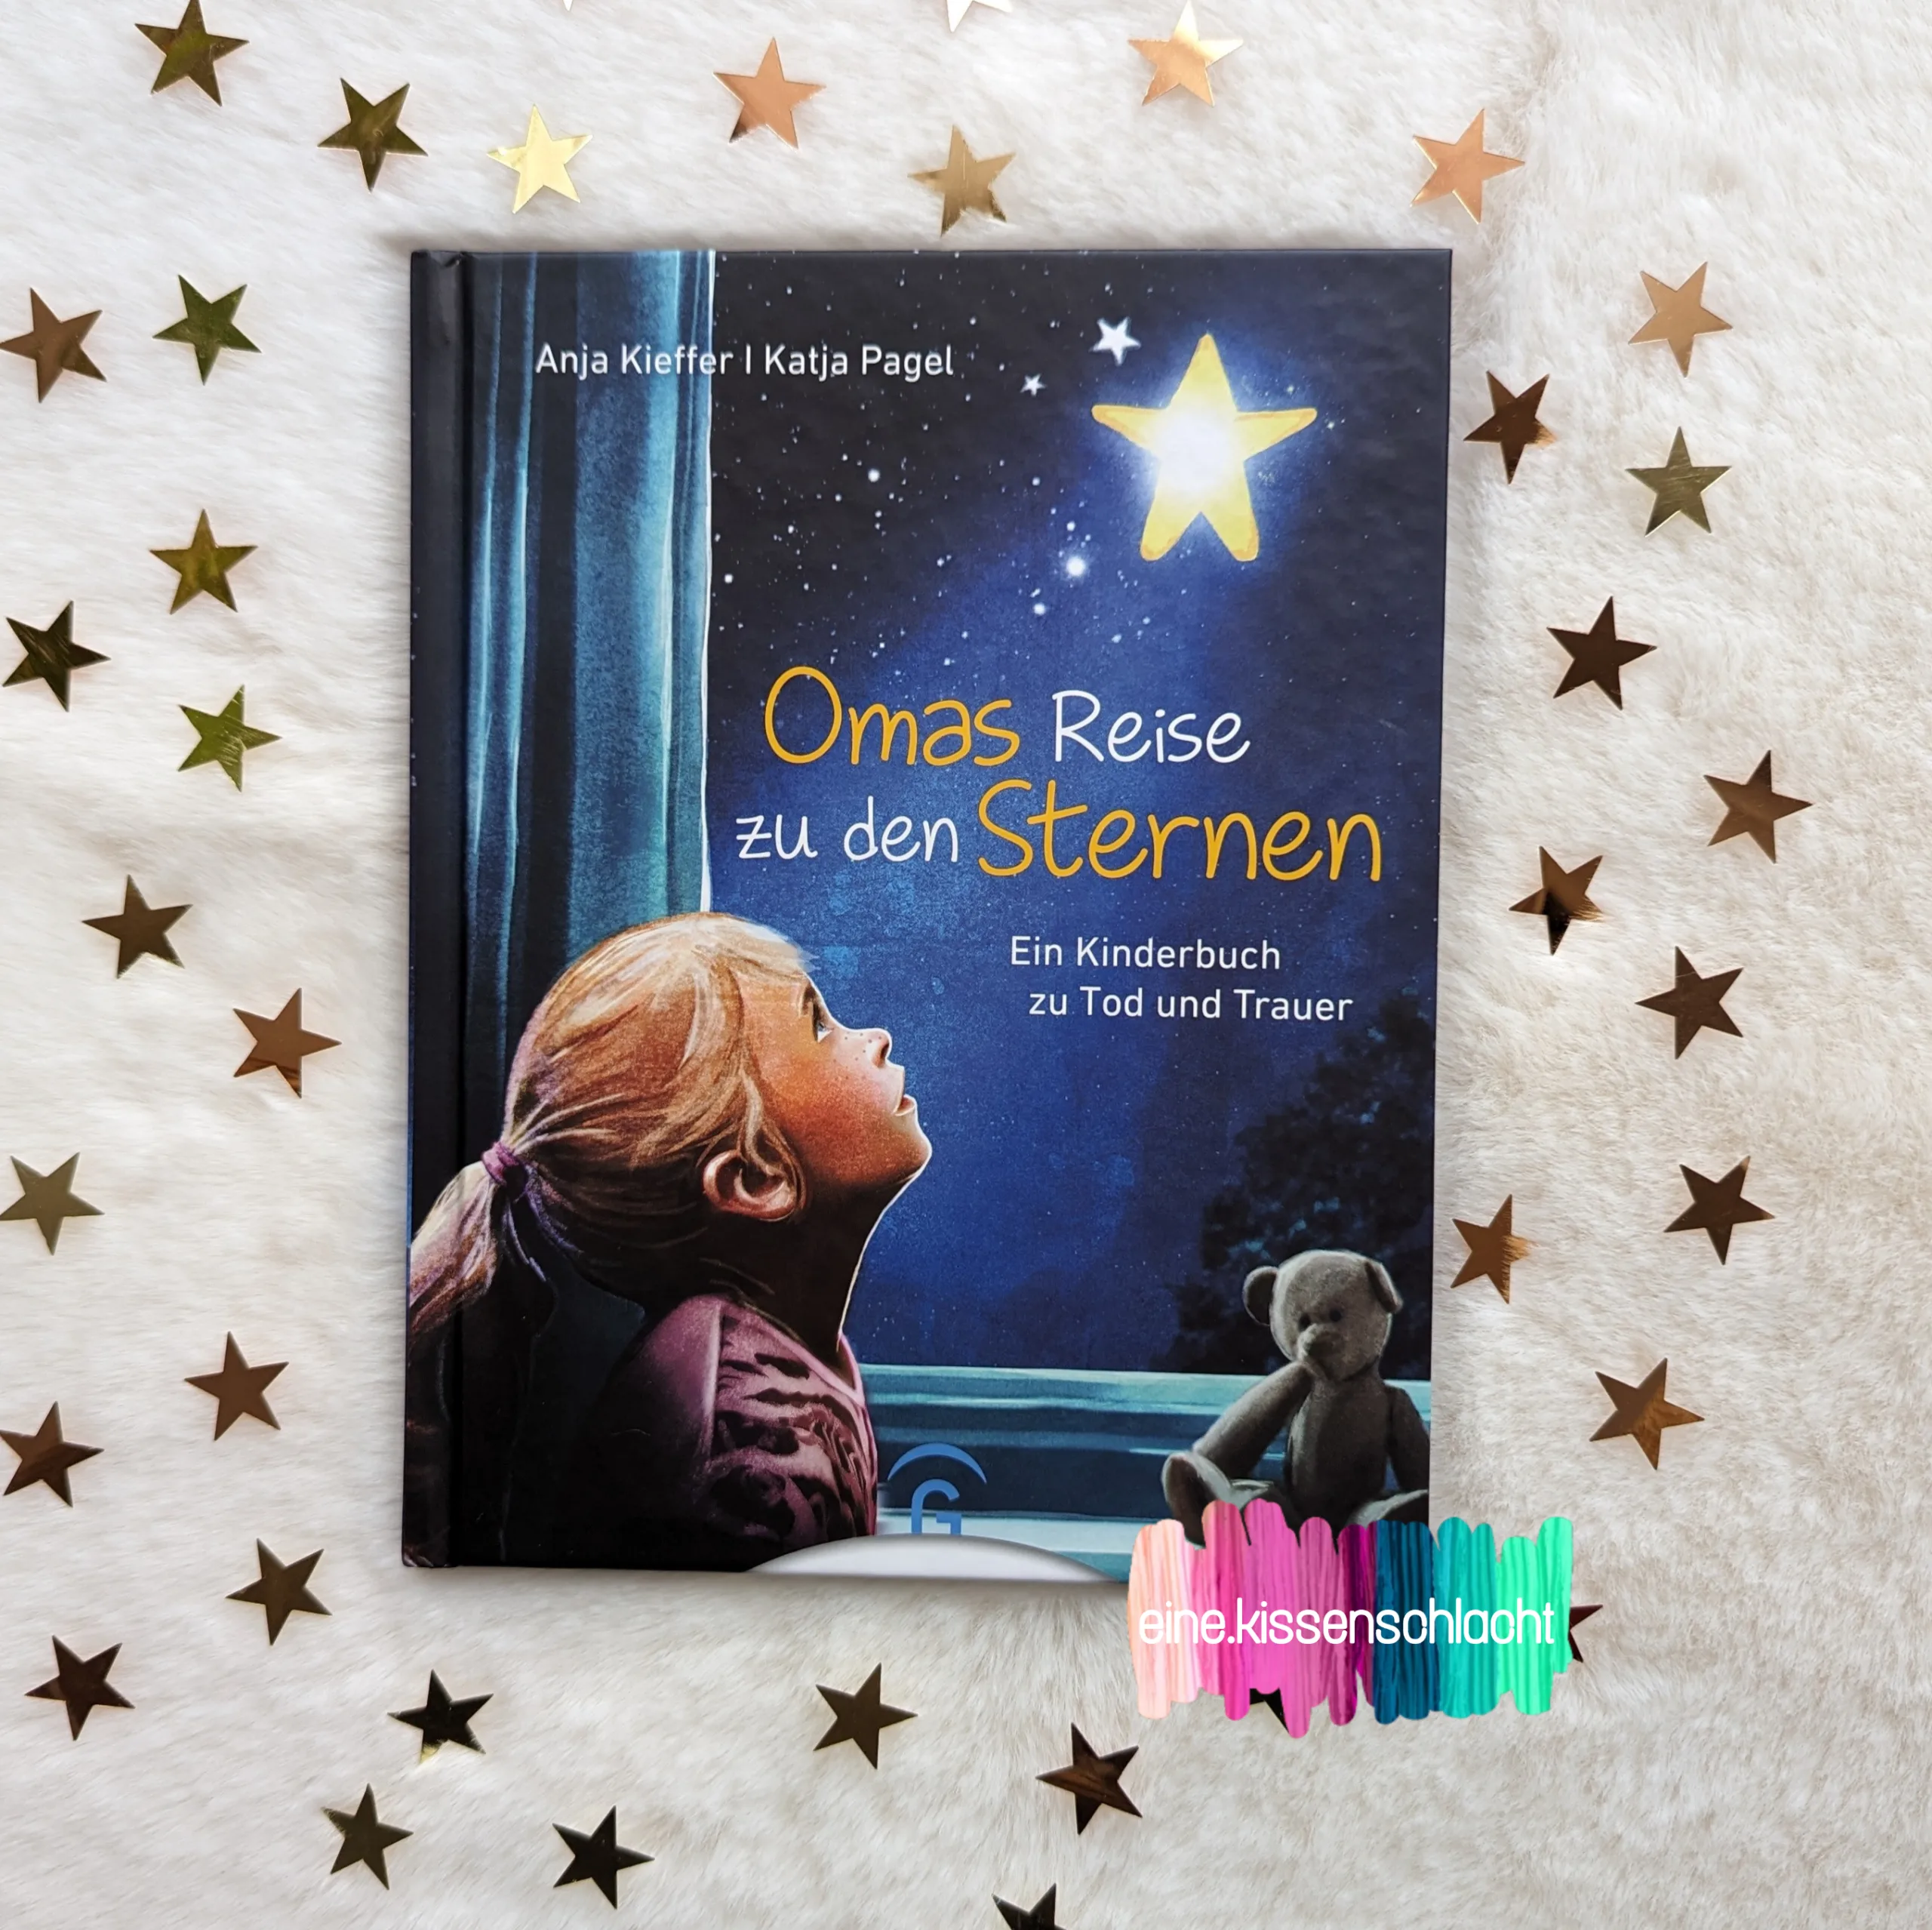 You are currently viewing Omas Reise zu den Sternen (Anja Kieffer)